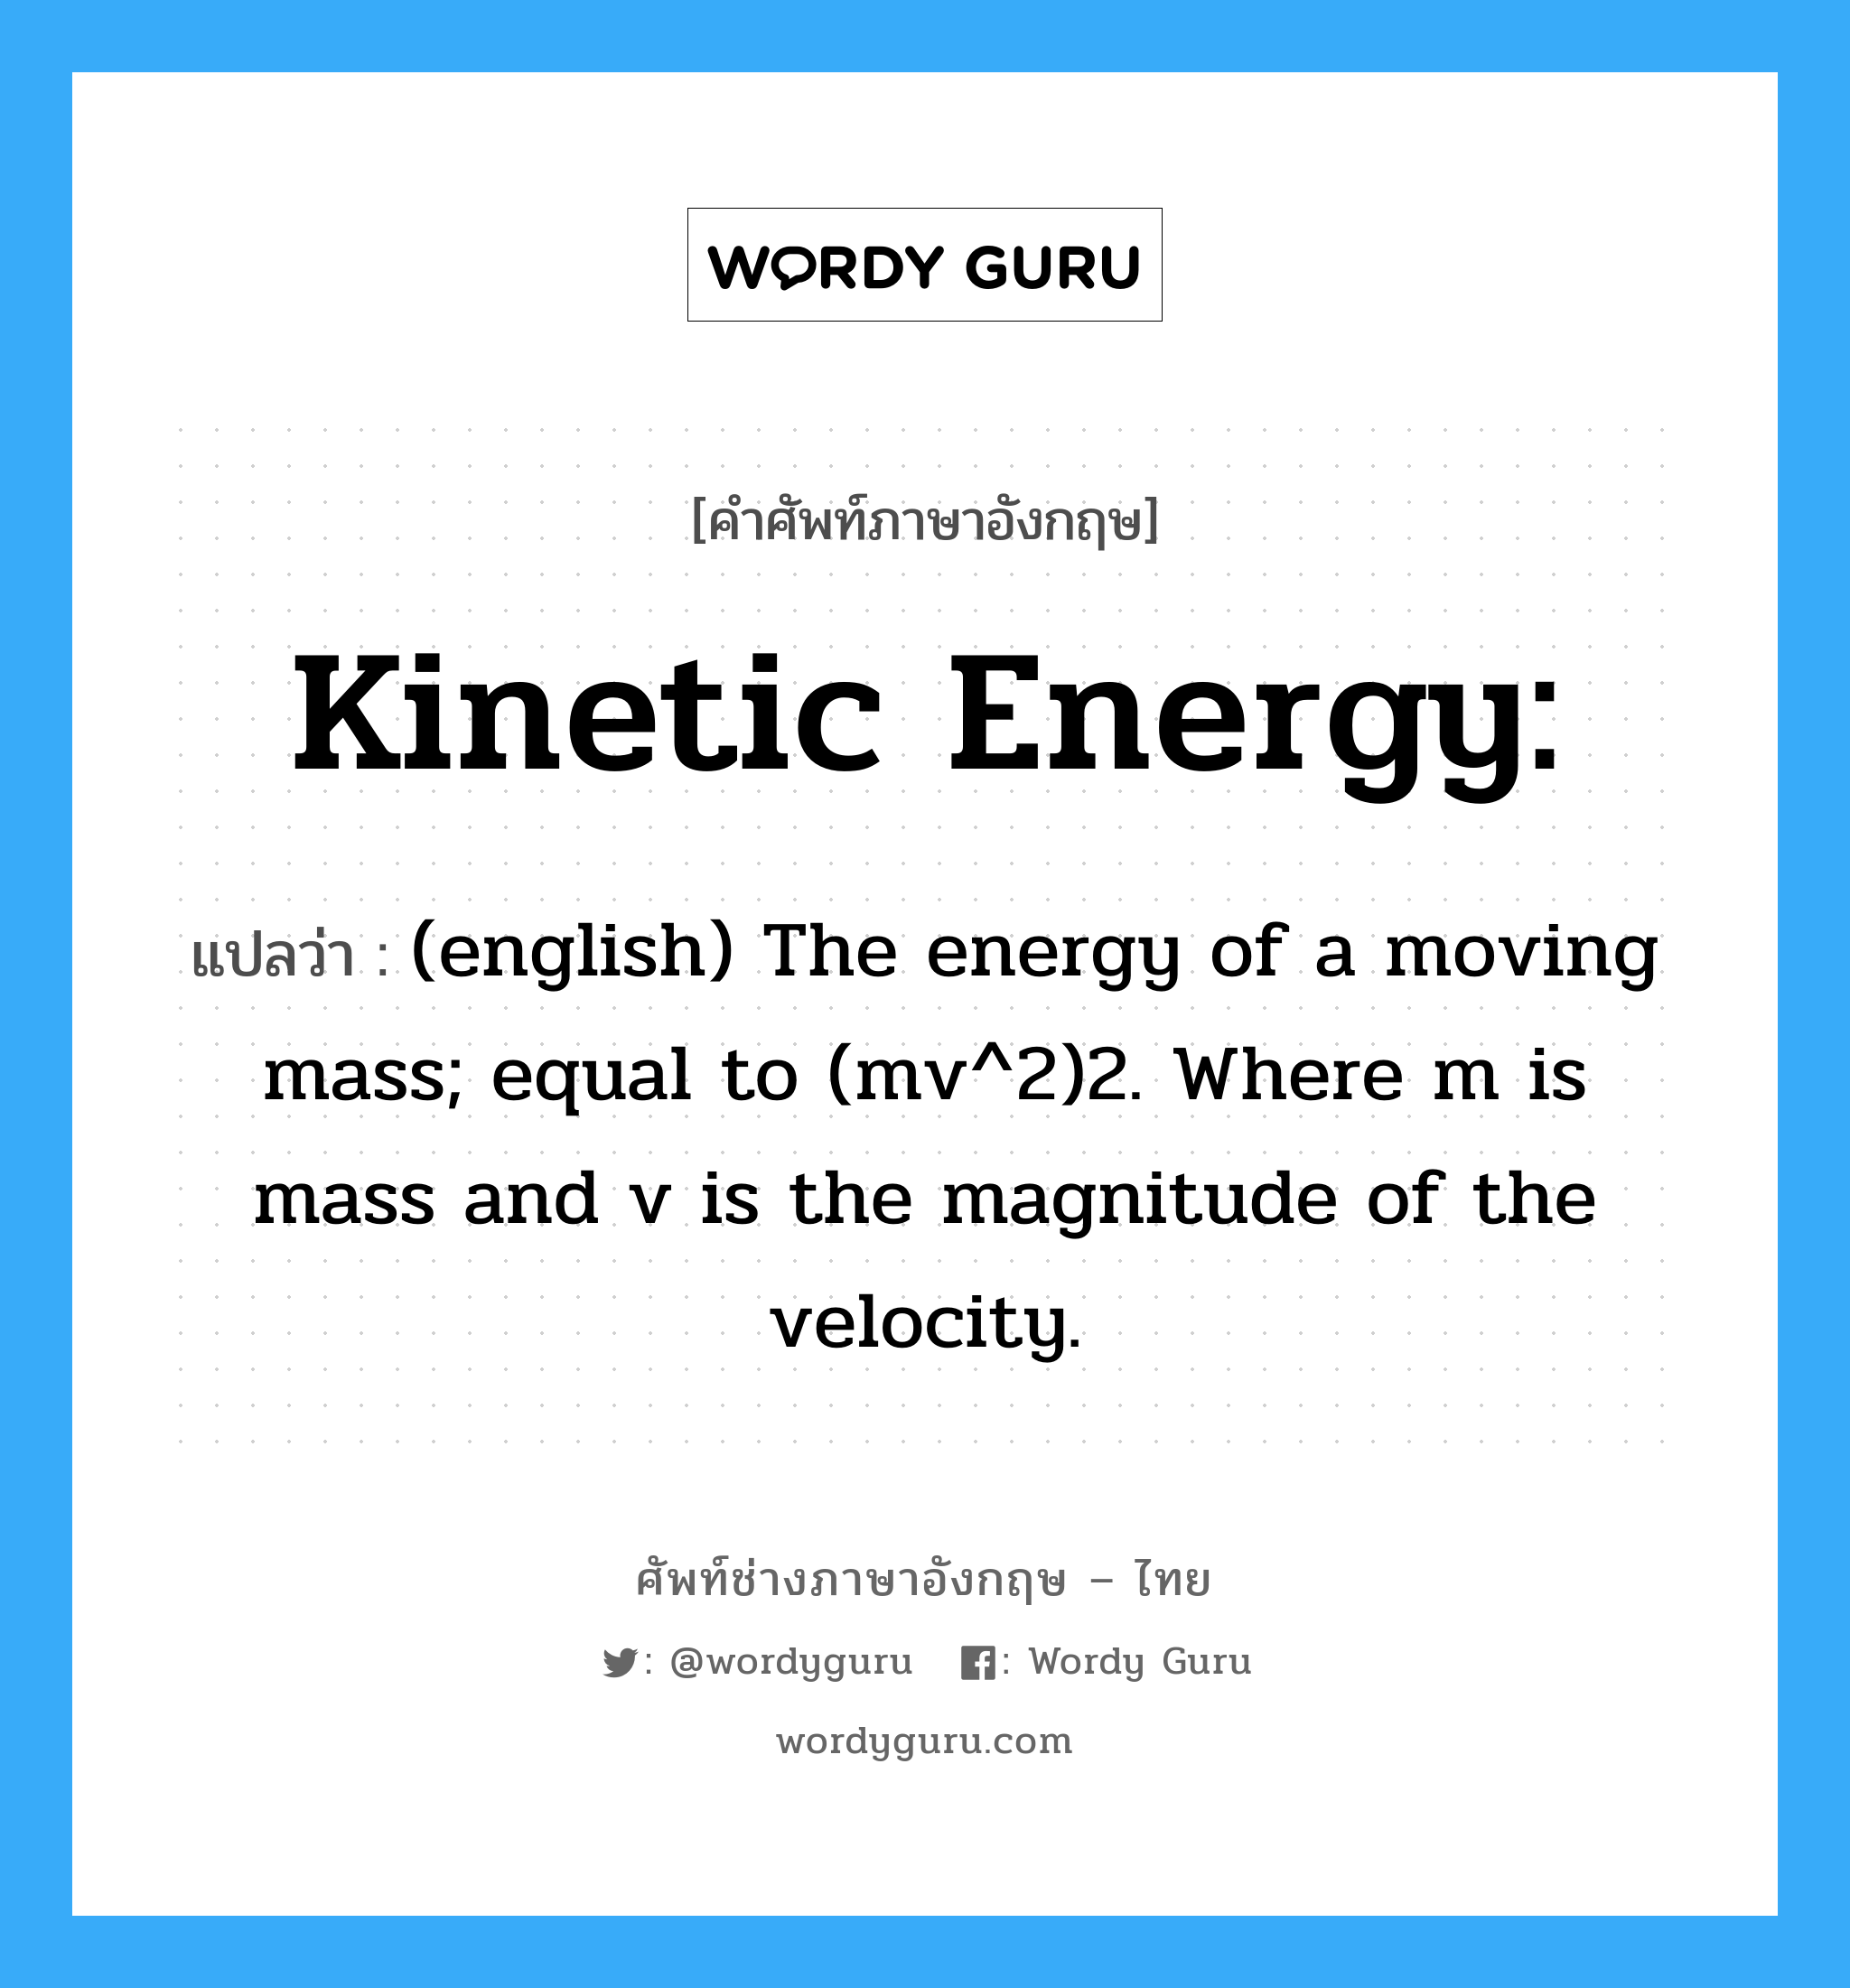 (english) The energy of a moving mass; equal to (mv^2)2. Where m is mass and v is the magnitude of the velocity. ภาษาอังกฤษ?, คำศัพท์ช่างภาษาอังกฤษ - ไทย (english) The energy of a moving mass; equal to (mv^2)2. Where m is mass and v is the magnitude of the velocity. คำศัพท์ภาษาอังกฤษ (english) The energy of a moving mass; equal to (mv^2)2. Where m is mass and v is the magnitude of the velocity. แปลว่า Kinetic Energy: